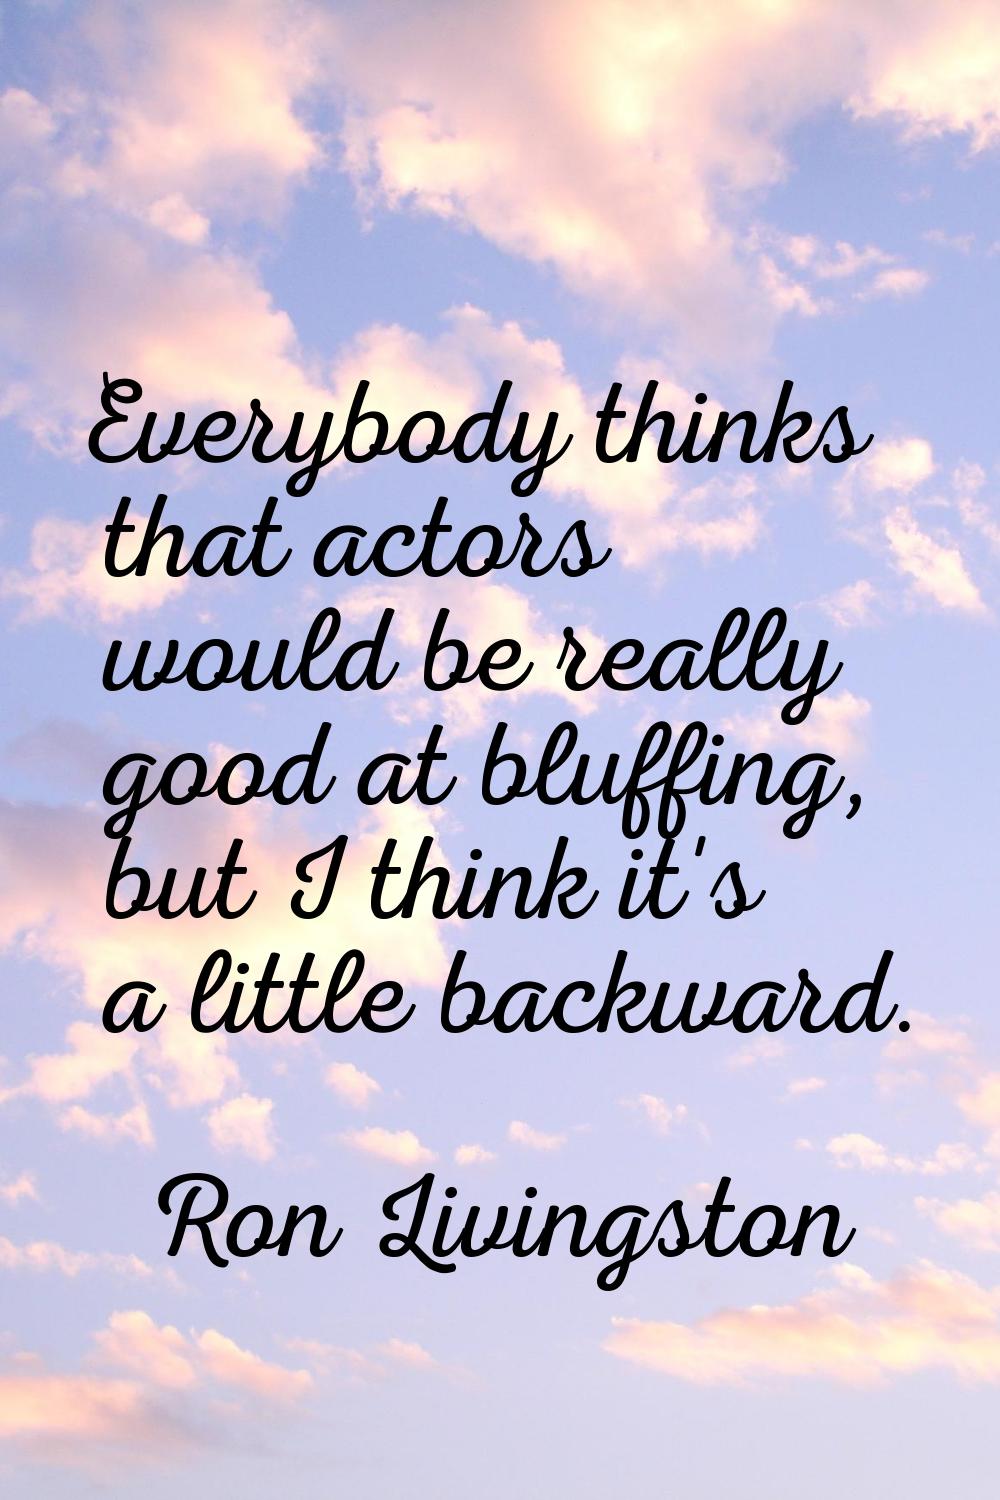 Everybody thinks that actors would be really good at bluffing, but I think it's a little backward.